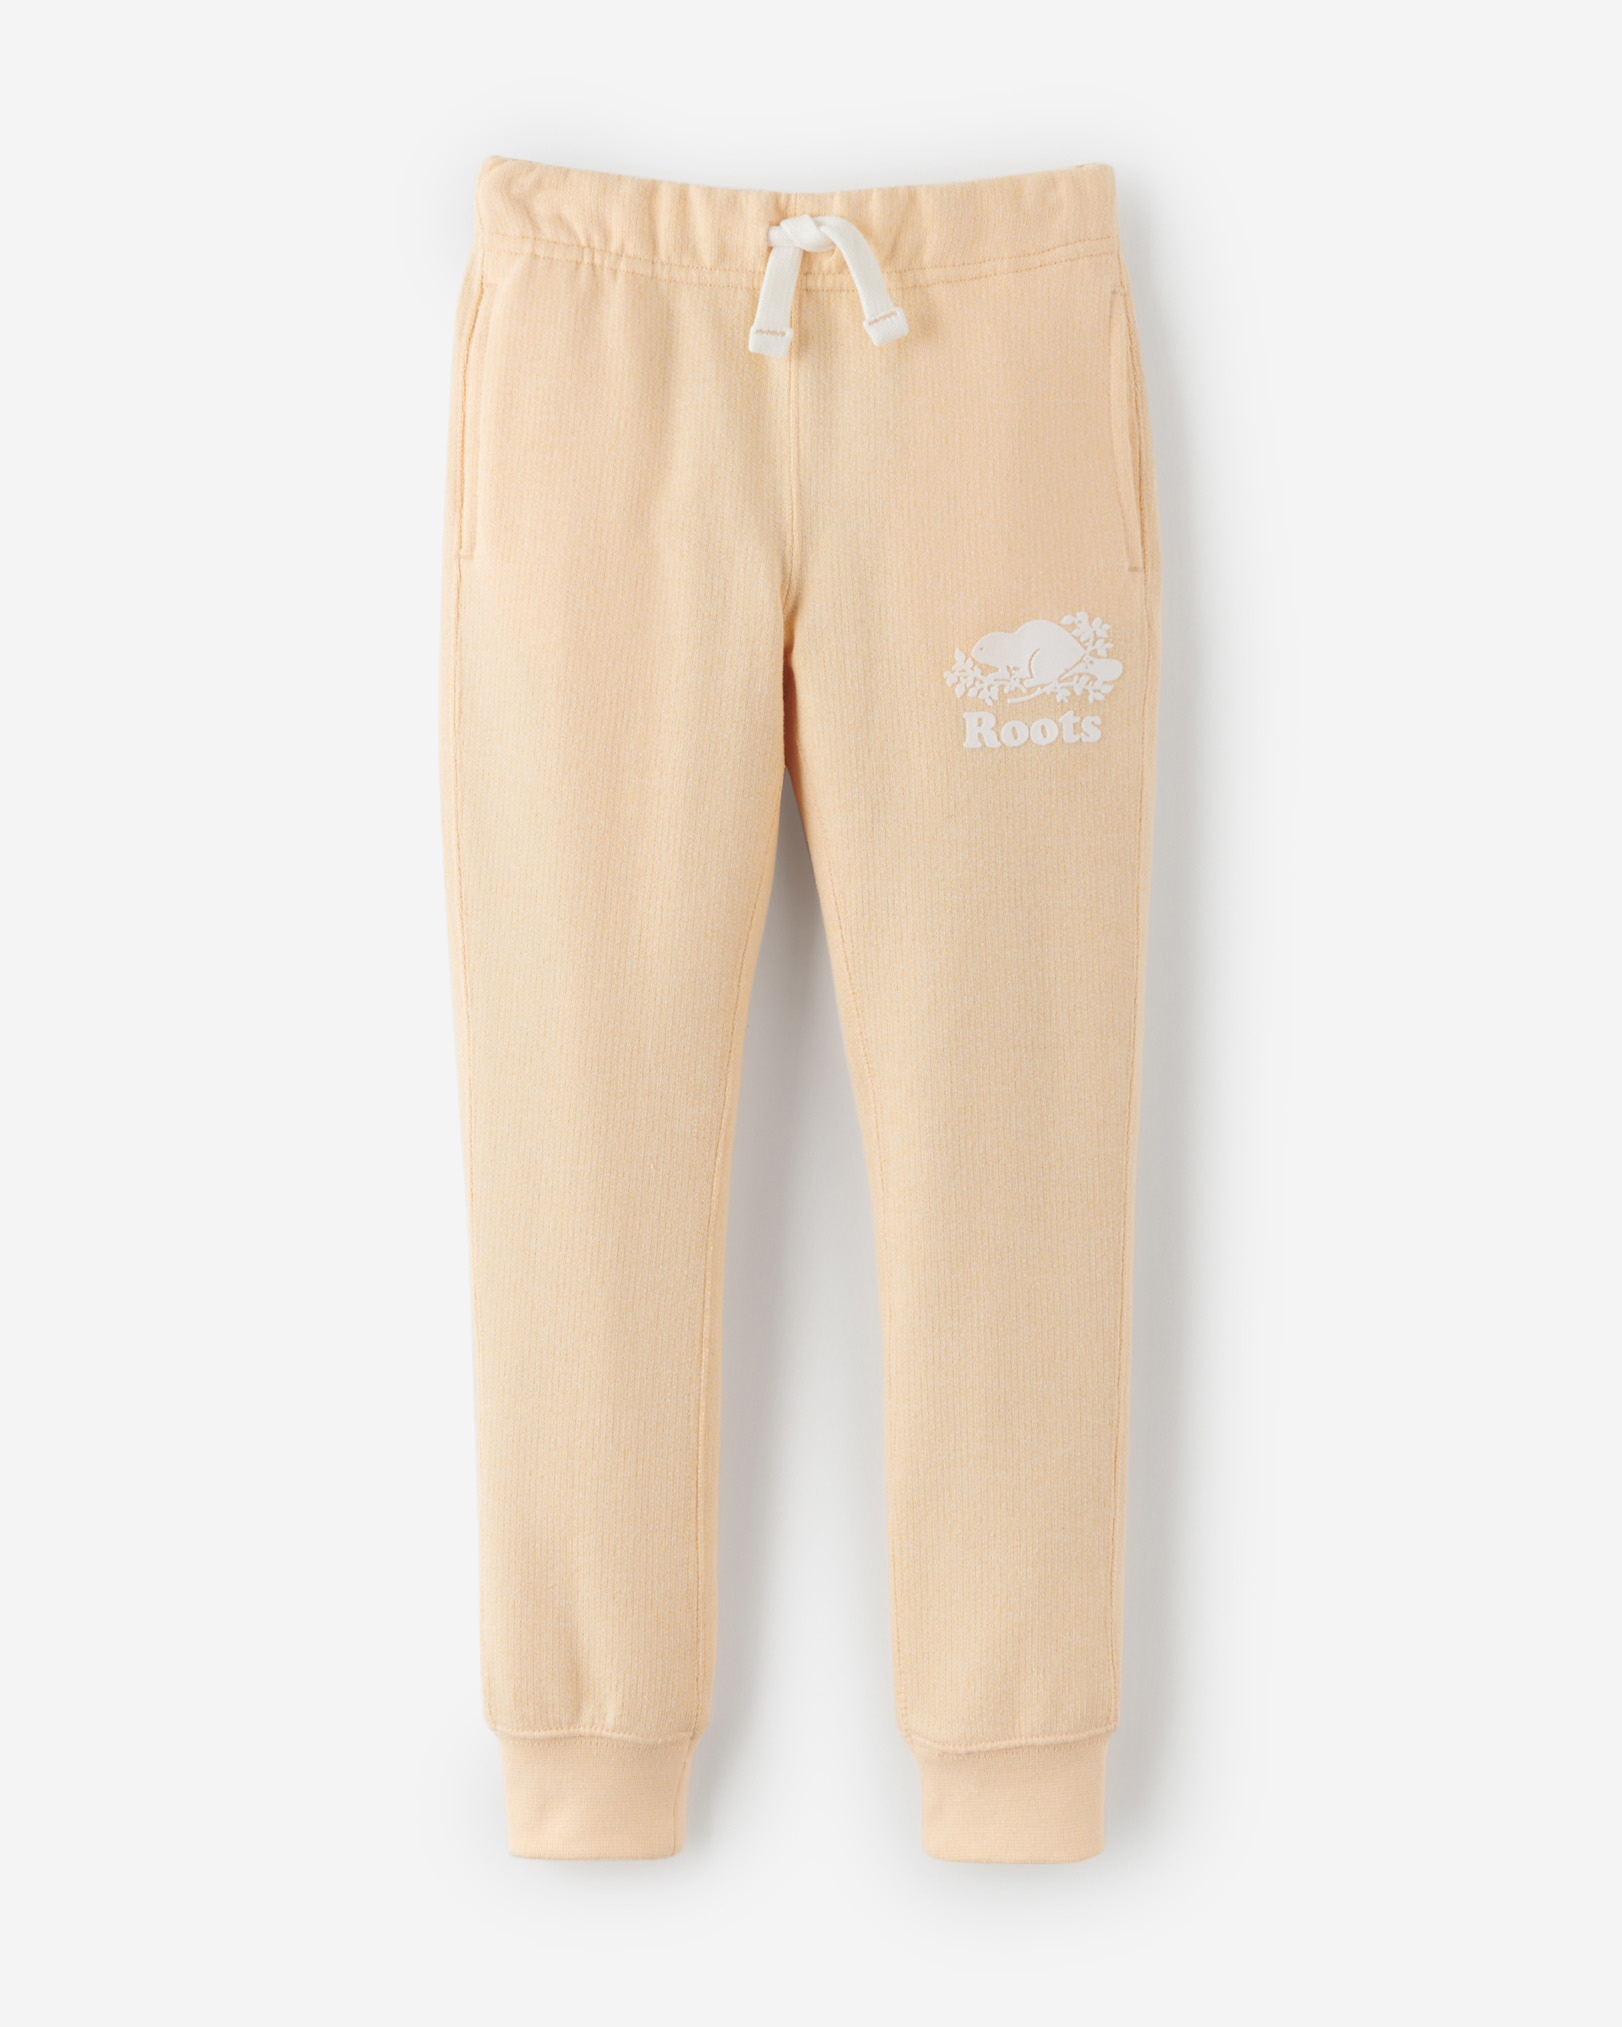 Roots Girl's Slim Cuff Sweatpant in Apricot Sherbet Ppr